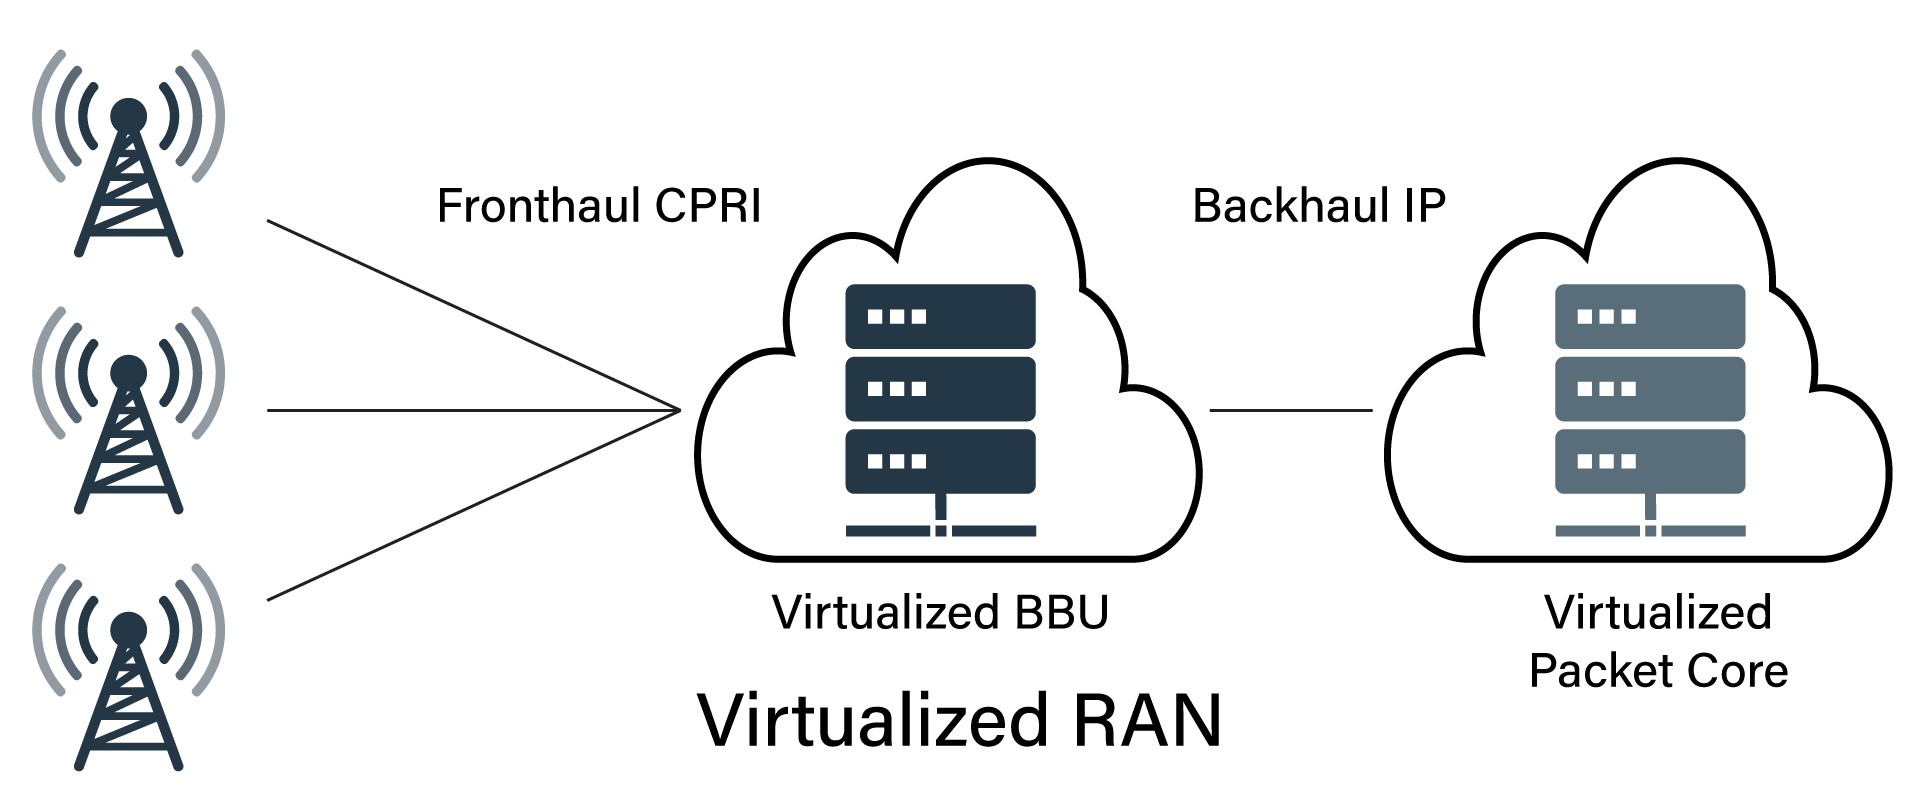 Diagram of virtualized RAN including Fronthaul CPRI and Backhaul IP